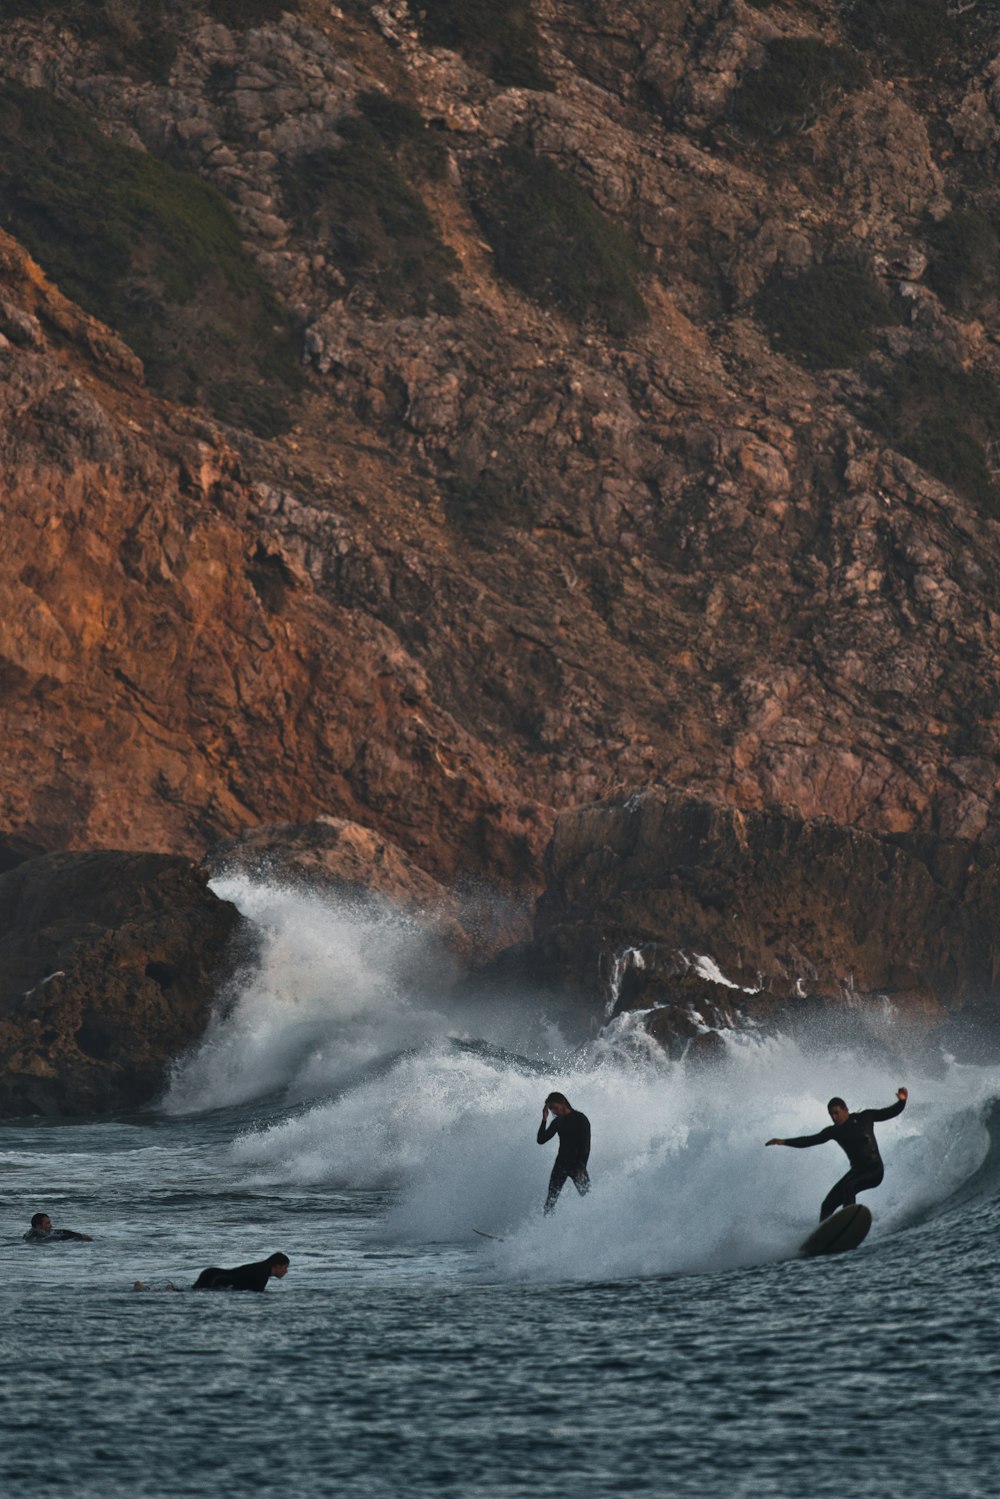 three surfers are riding a wave in the ocean